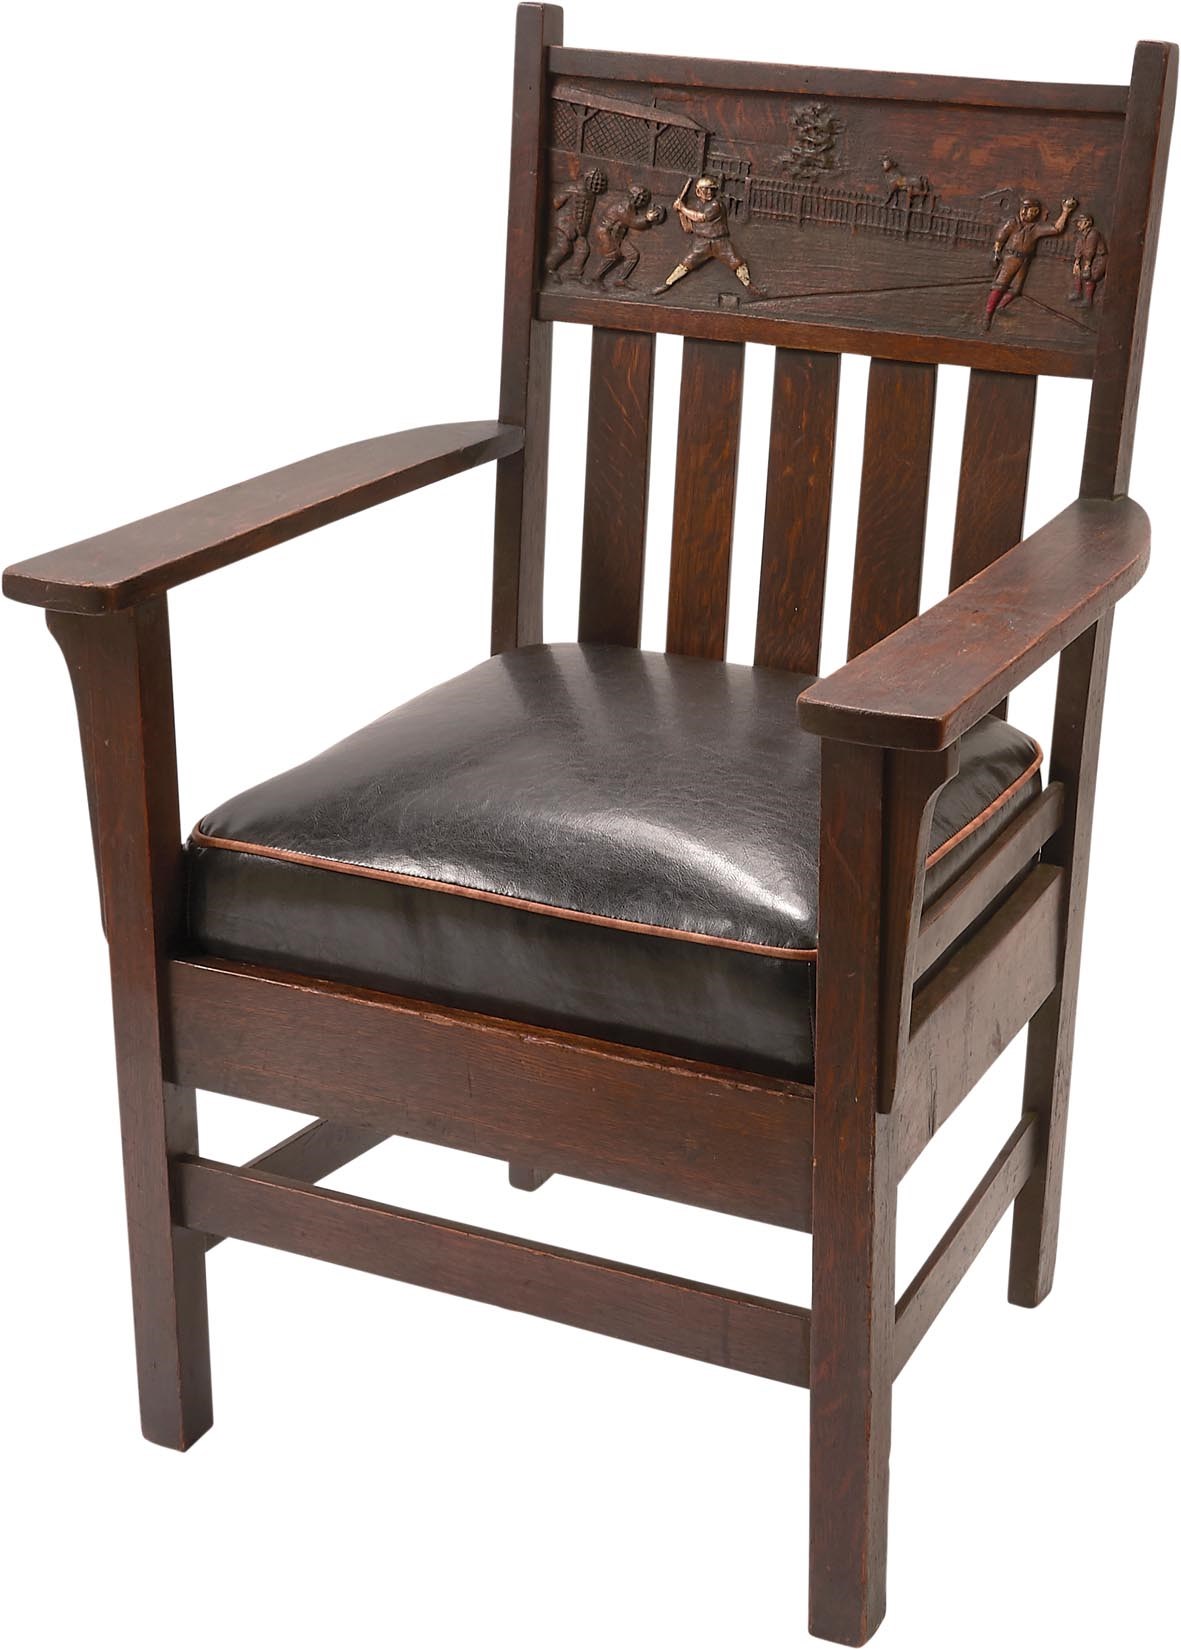 Early Baseball - 1910s Mission Oak Baseball Chair - Nicest We Have Seen